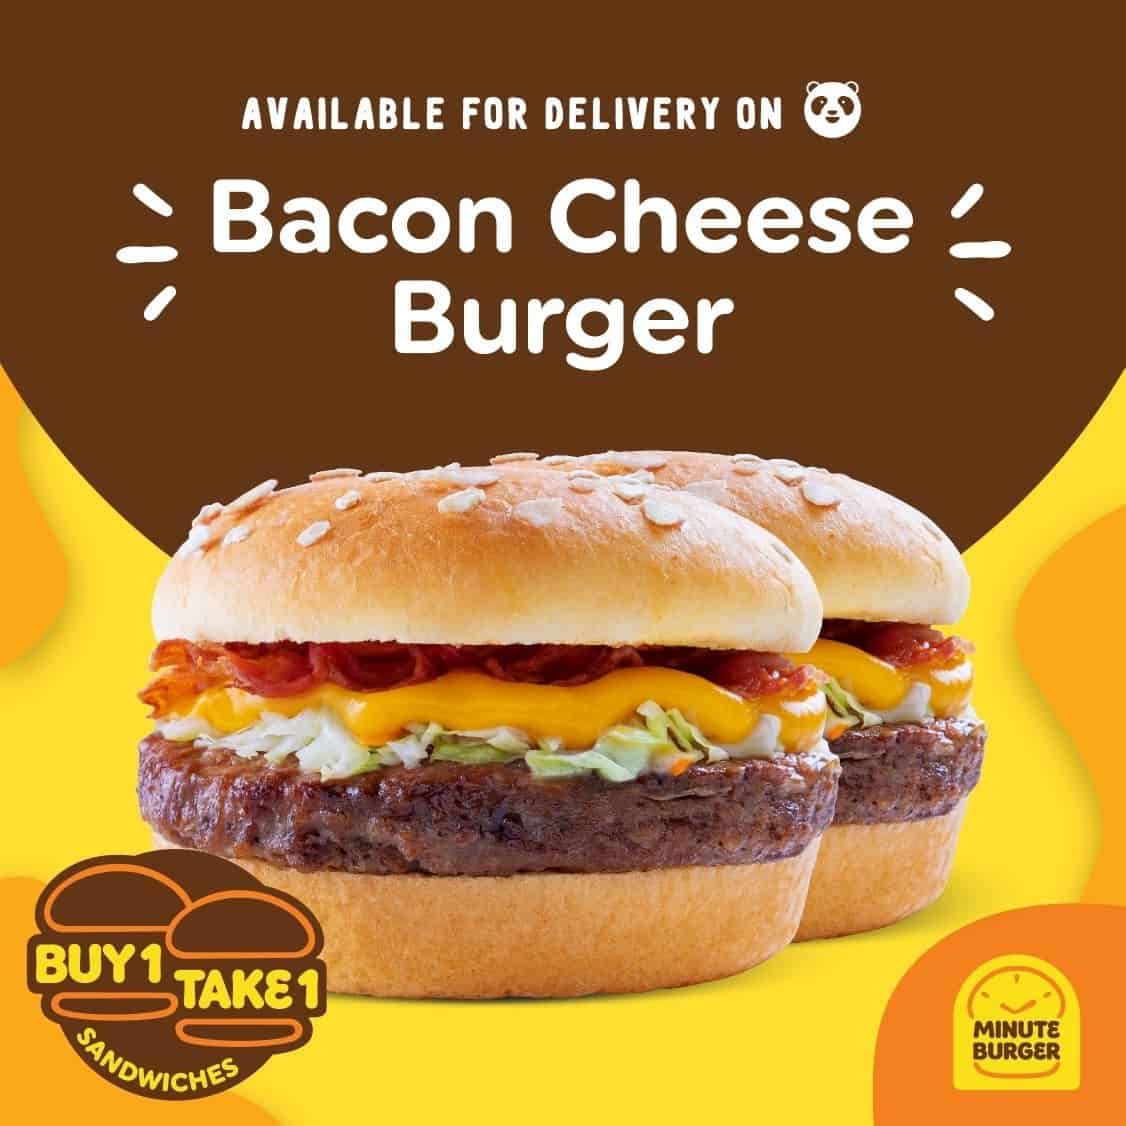 Bacon Cheese Burger on Minute Burger Menu Philippines